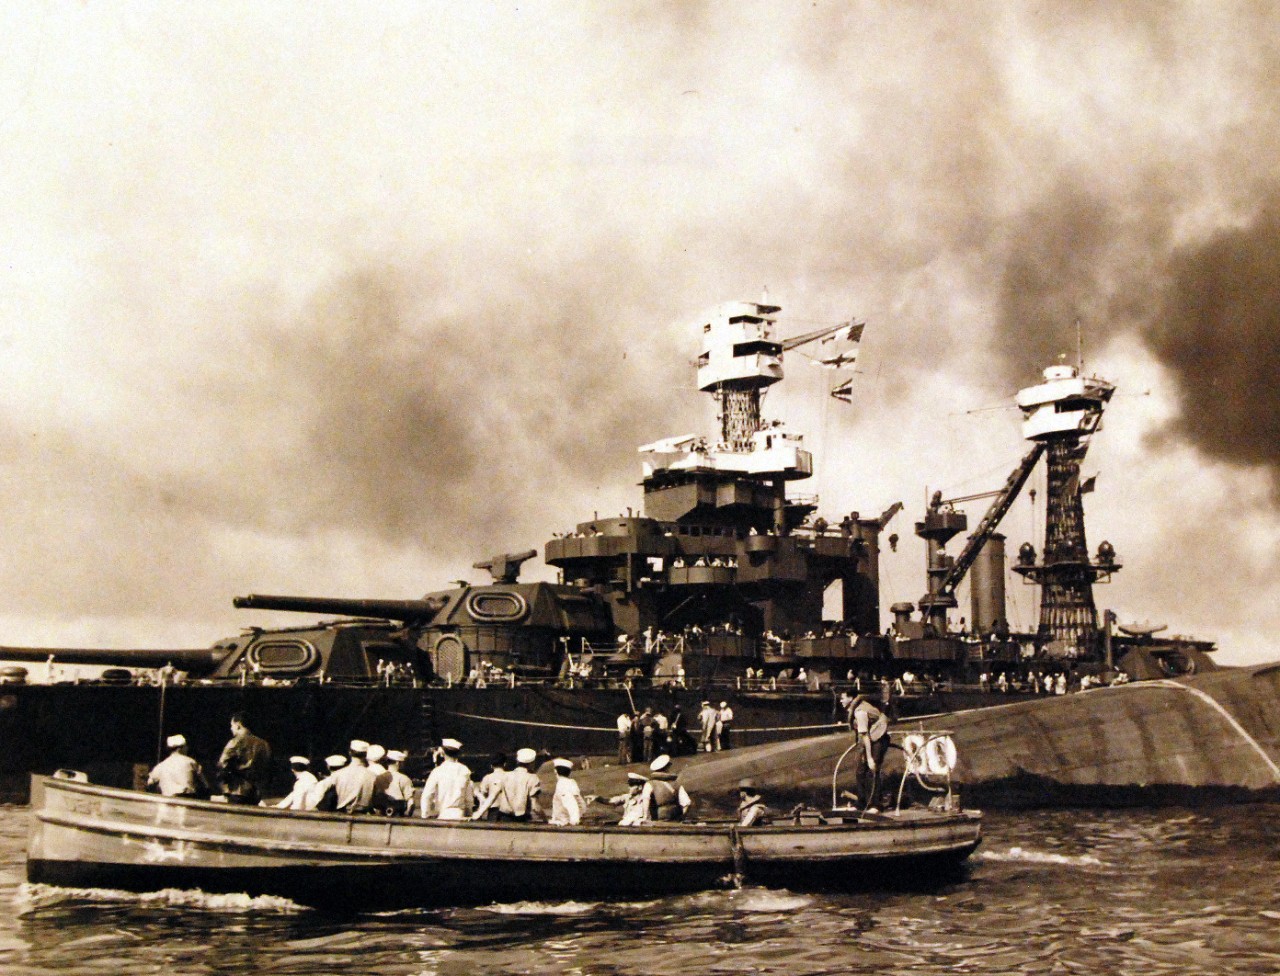 80-G-32488:  Japanese Attack on Pearl Harbor, December 7, 1941.  View of “Battleship Row” during or immediately after the Japanese raid.  The capsized USS Oklahoma (BB 37) is in the center, alongside USS Maryland (BB 46). Official U.S. Navy photograph, now in the collections of the National Archives.   (9/15/15).